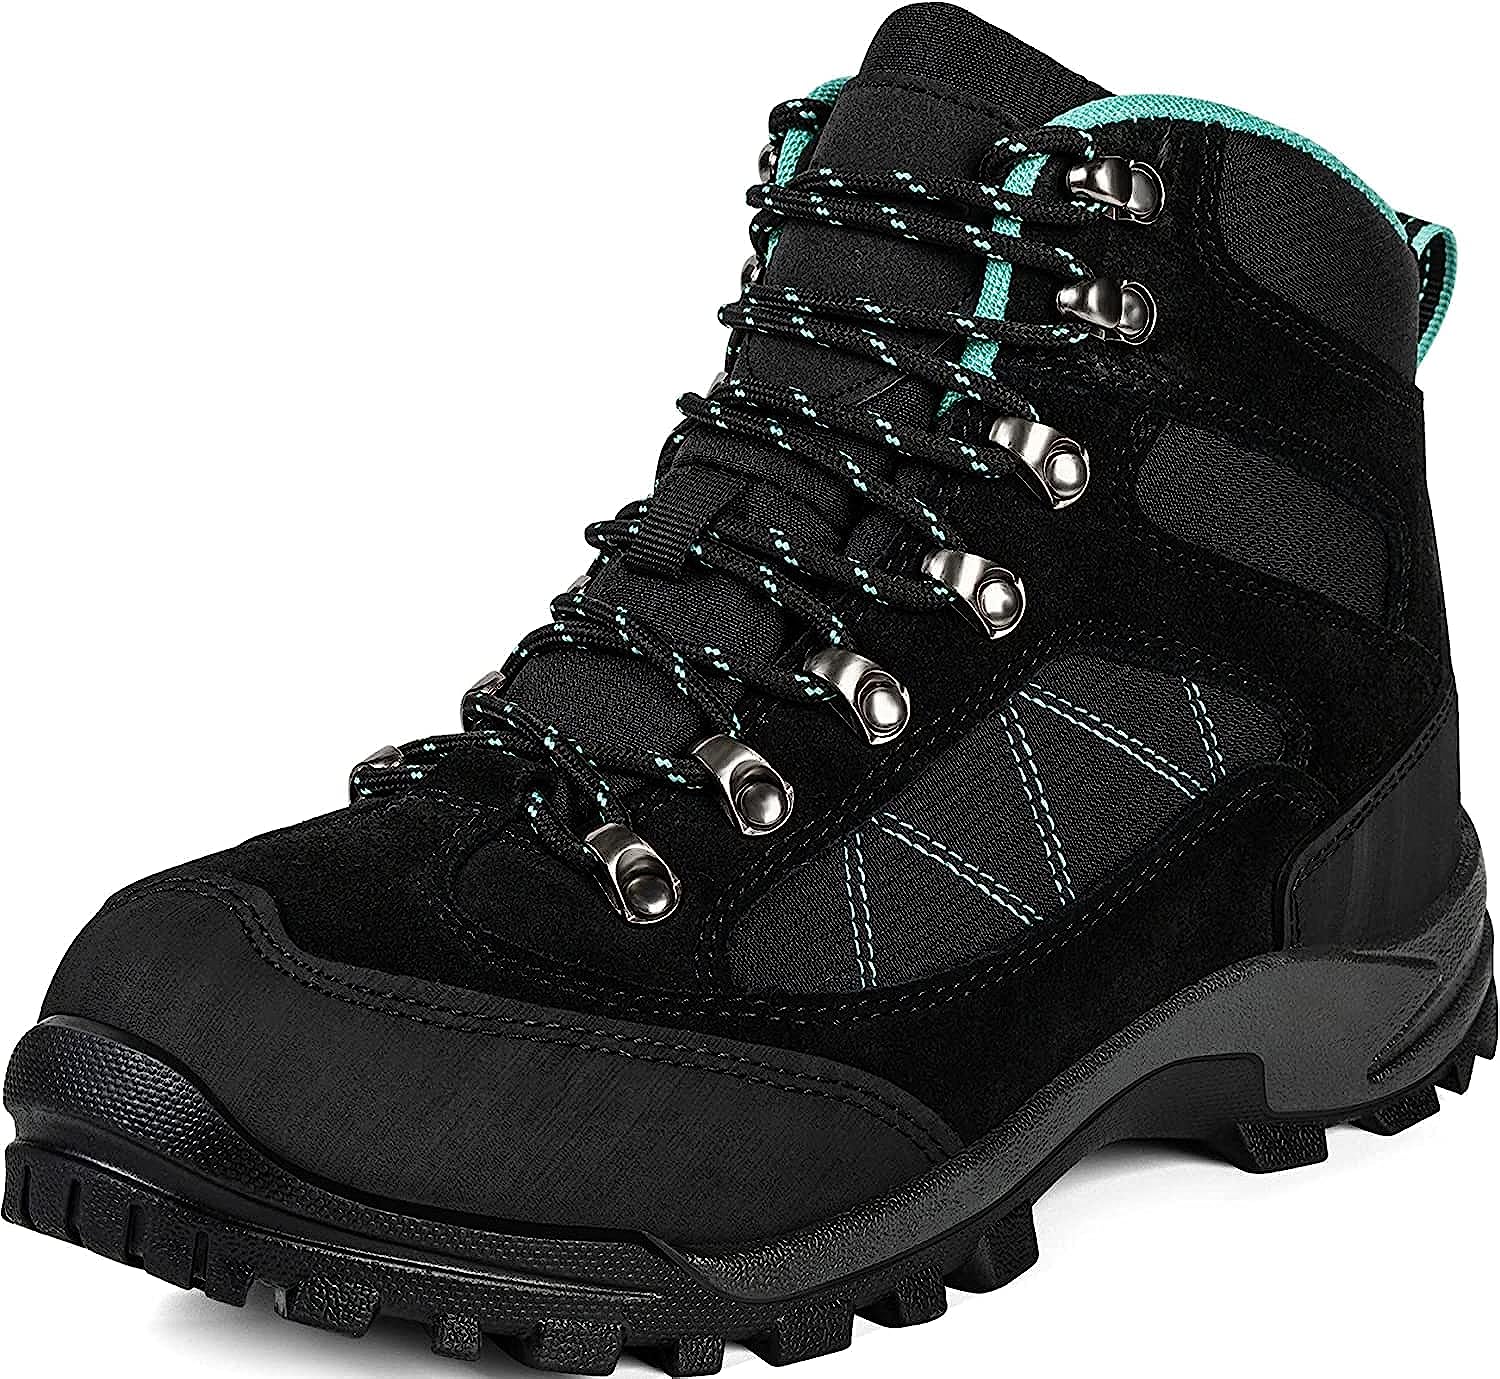 @ R CORD Hiking Boots Women Waterproof Ankle Support [...]